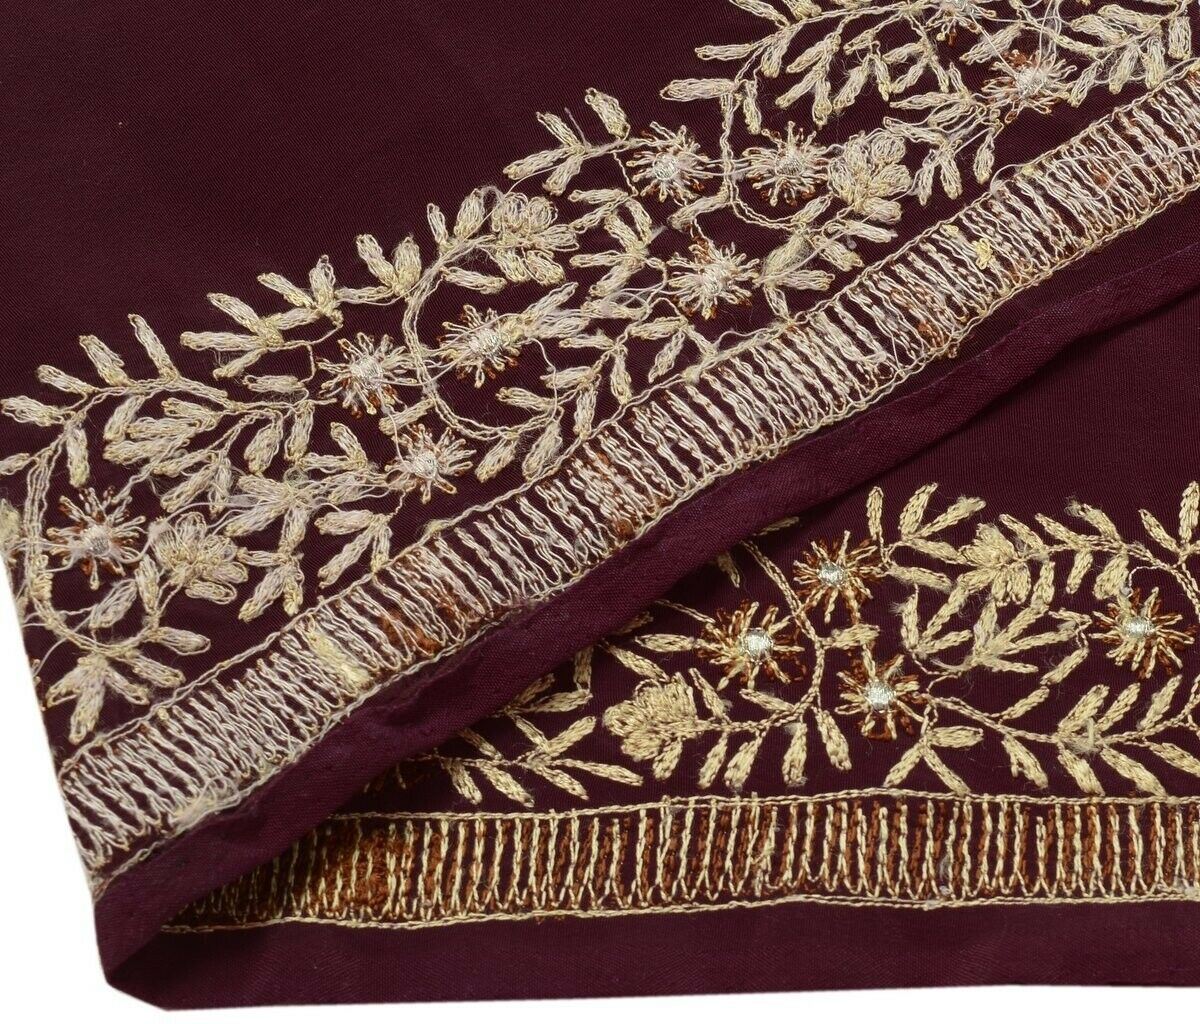 Vintage Sari Border Indian Trim Embroidered Floral Sewing Ribbon Lace Purple